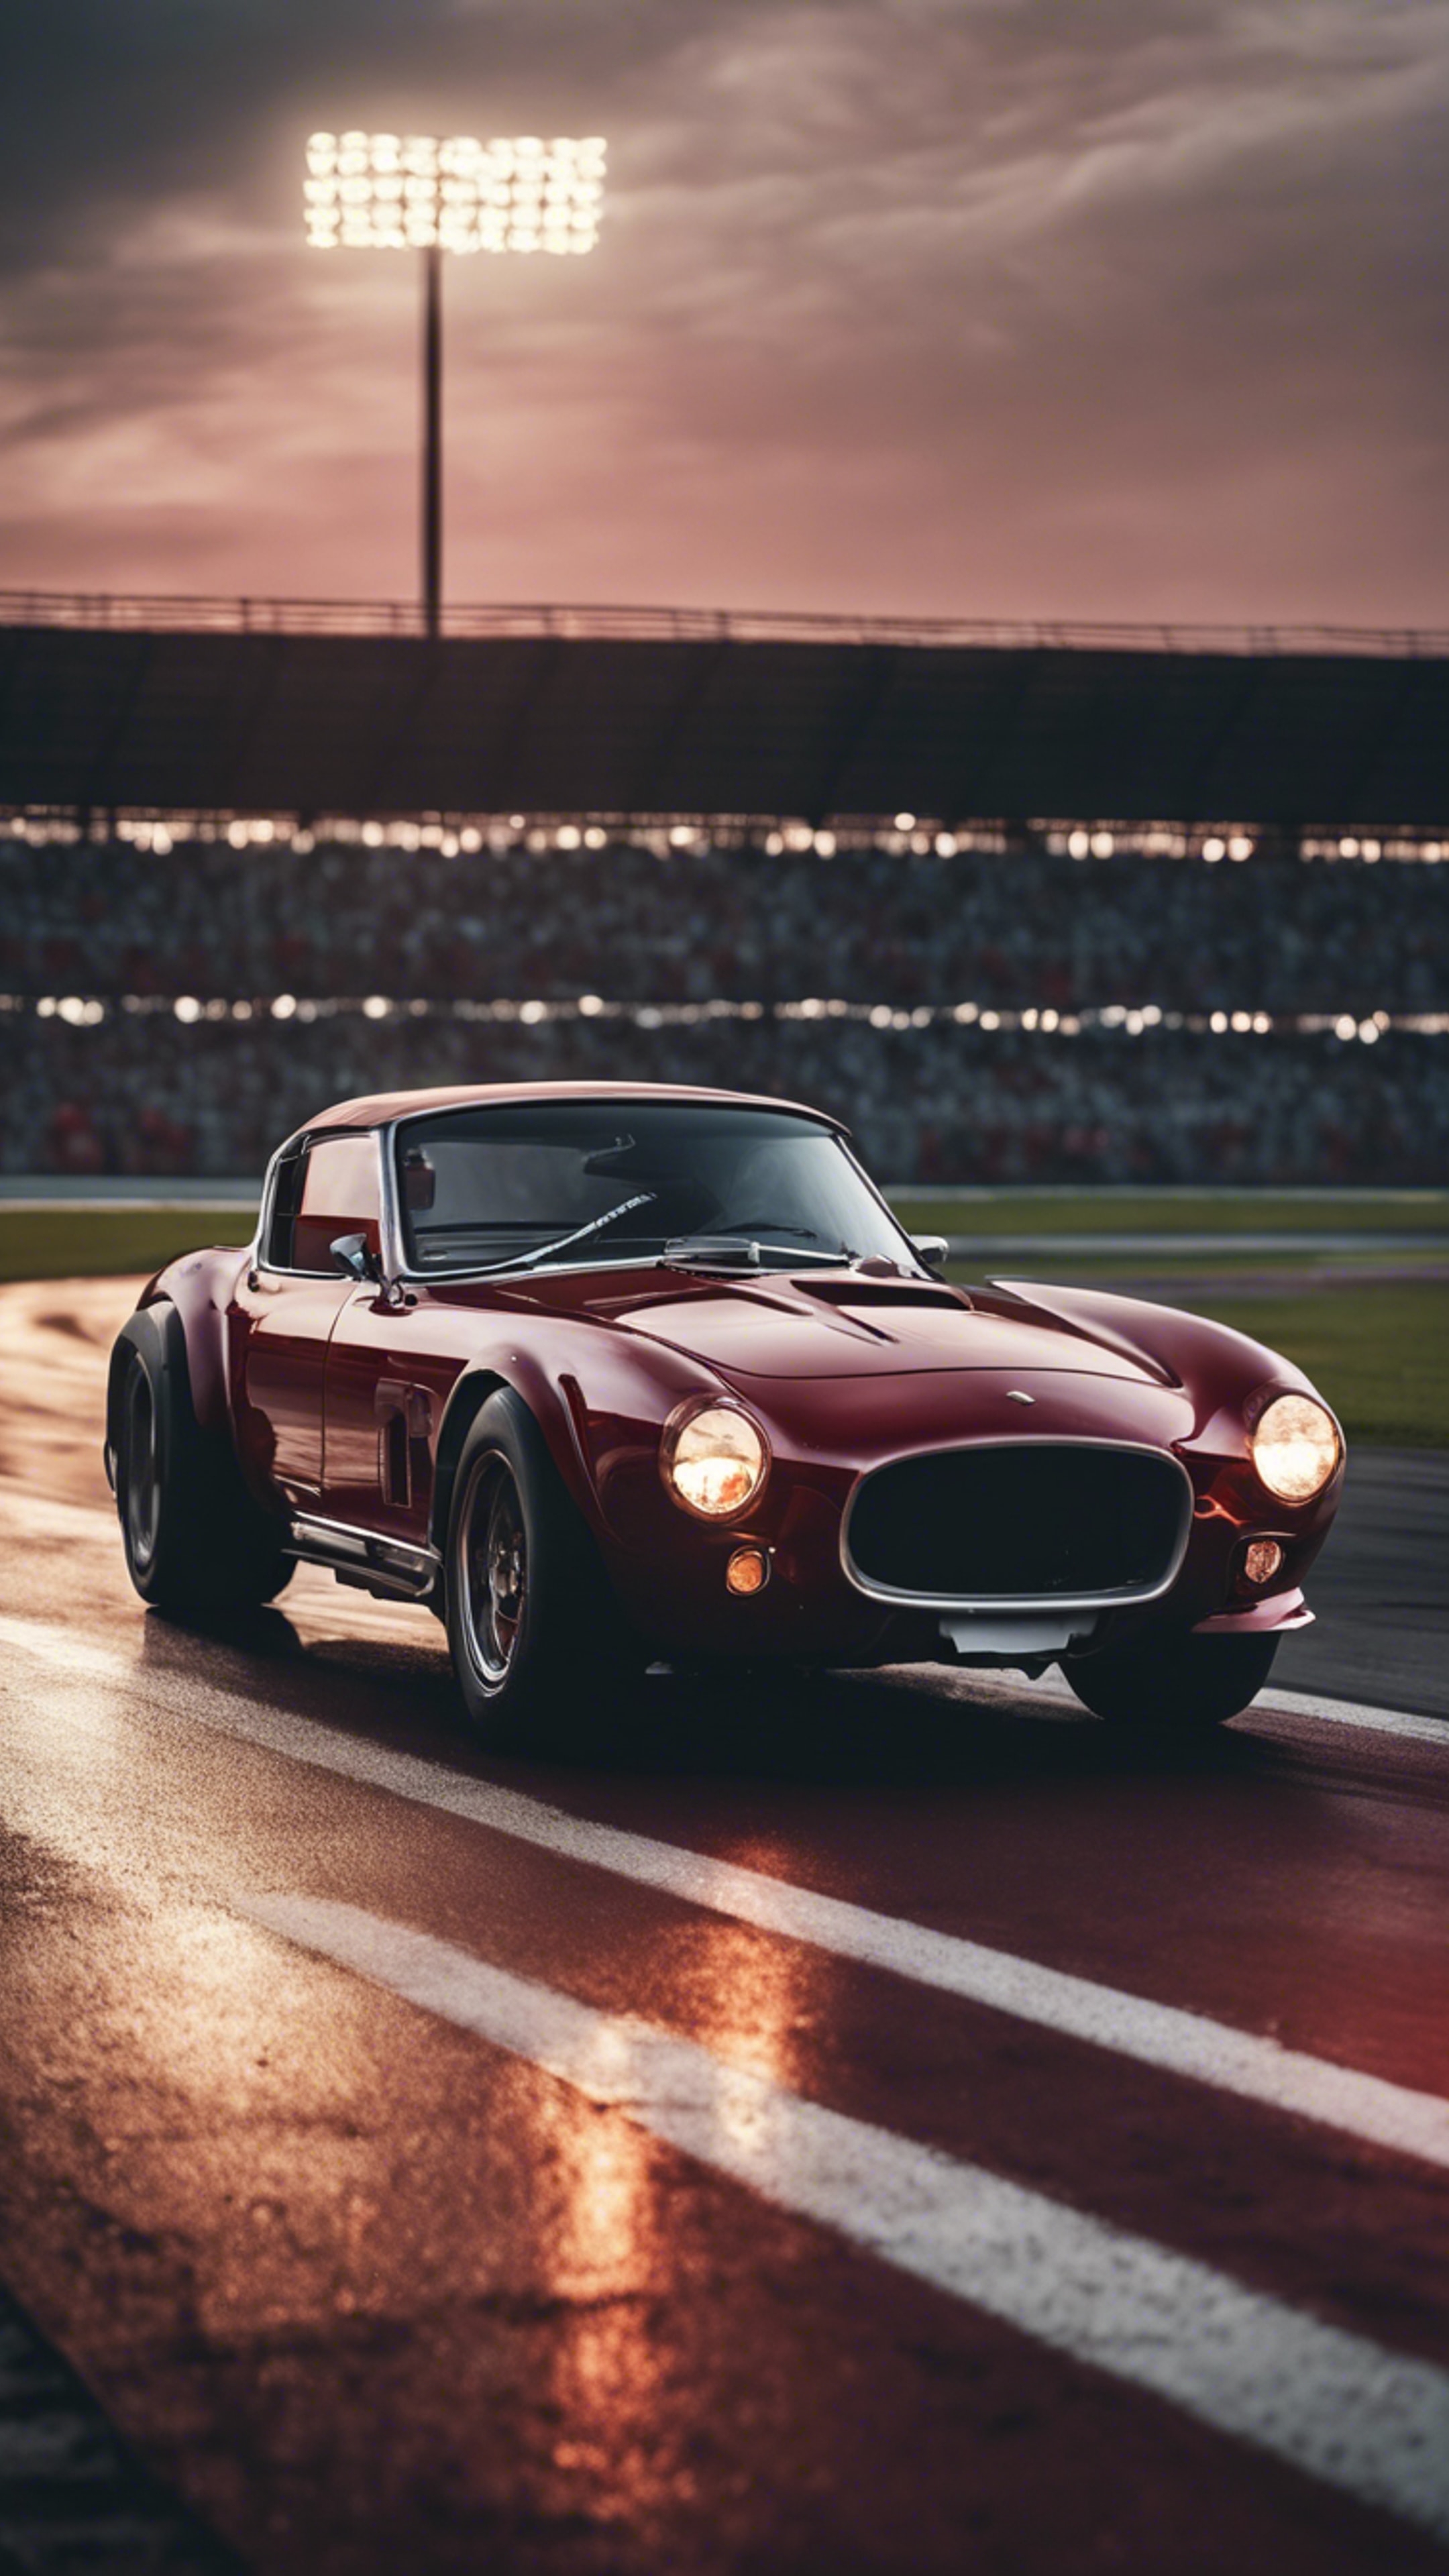 A richly toned dark red sports car racing on a track under the evening sky. Шпалери[f7c86e5103c94fca80ae]